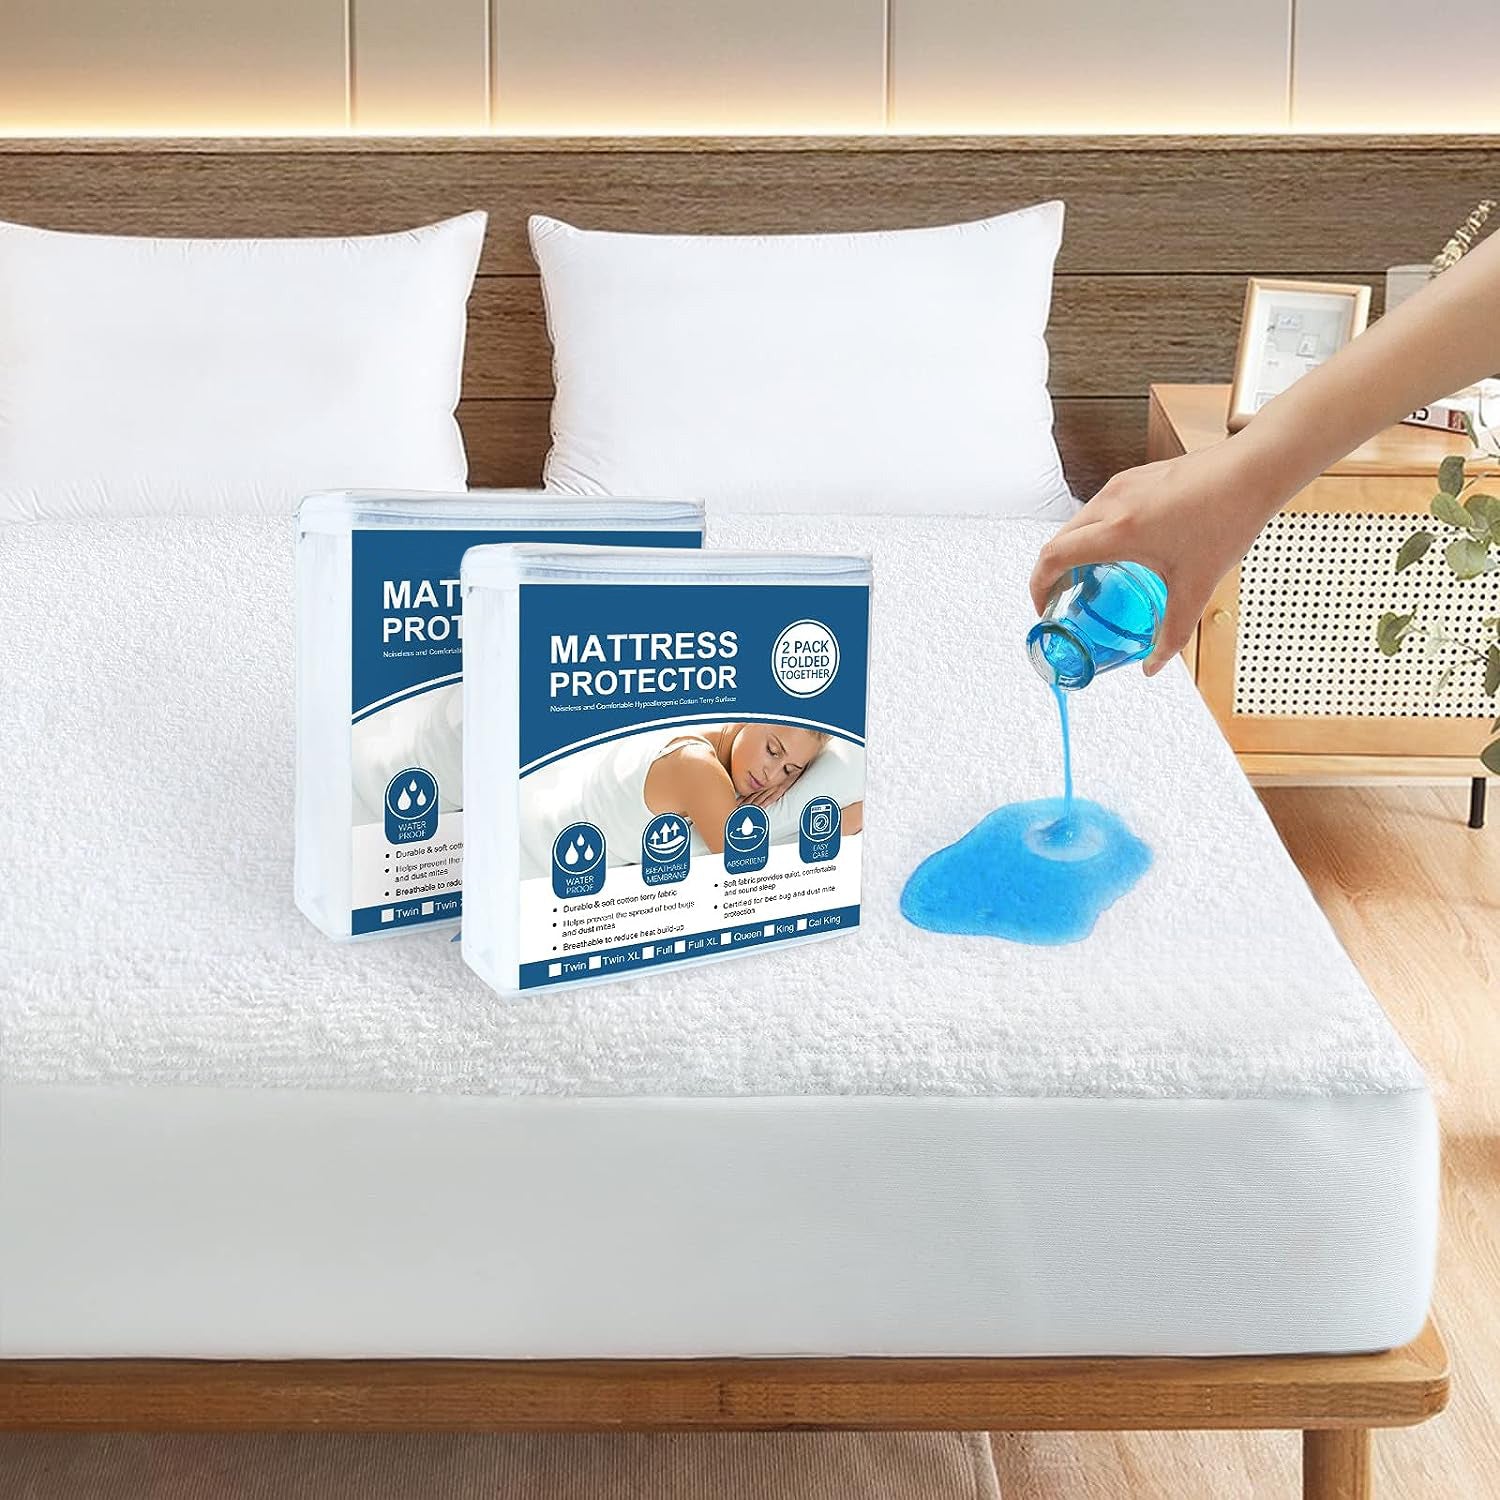 Waterproof Mattress Protector, 2 Pack, Soft & Breathable Terry, Noiseless Mattress Cover Fitted with Deep Pocket, Skin-Friendly & Machine Washable - Biloban Online Store